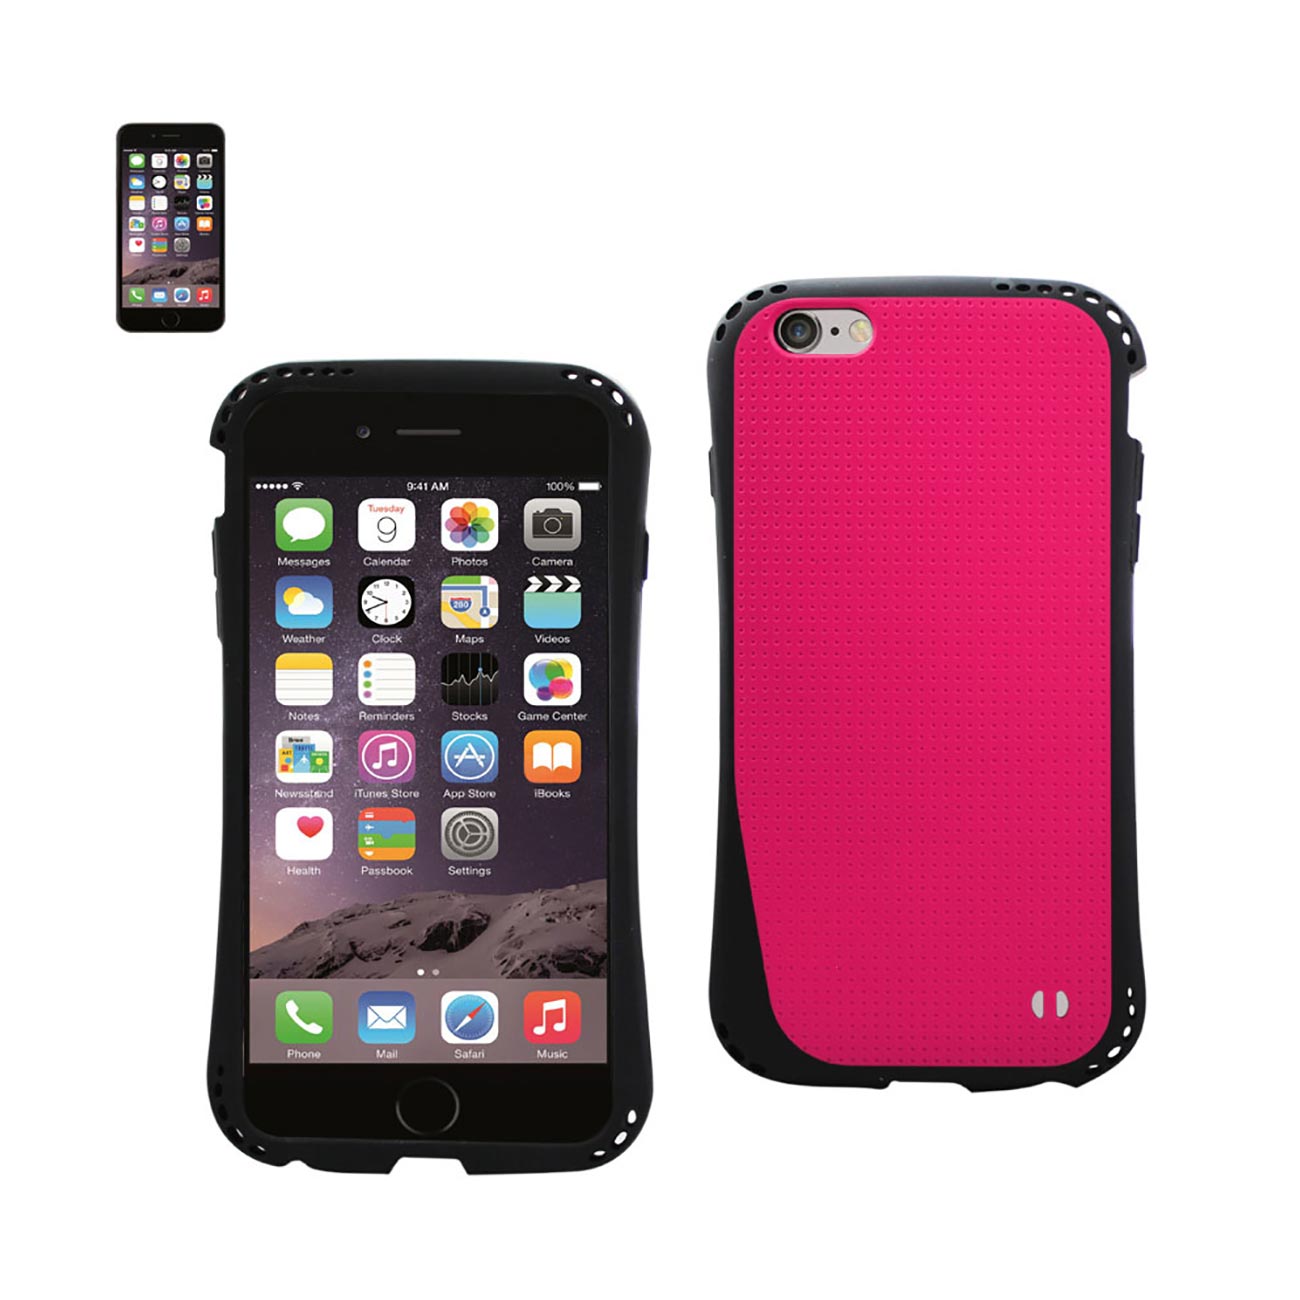 Case Dropproof Air Cushion With Chain Hole iPhone 6S/ 6 Hot Pink Color